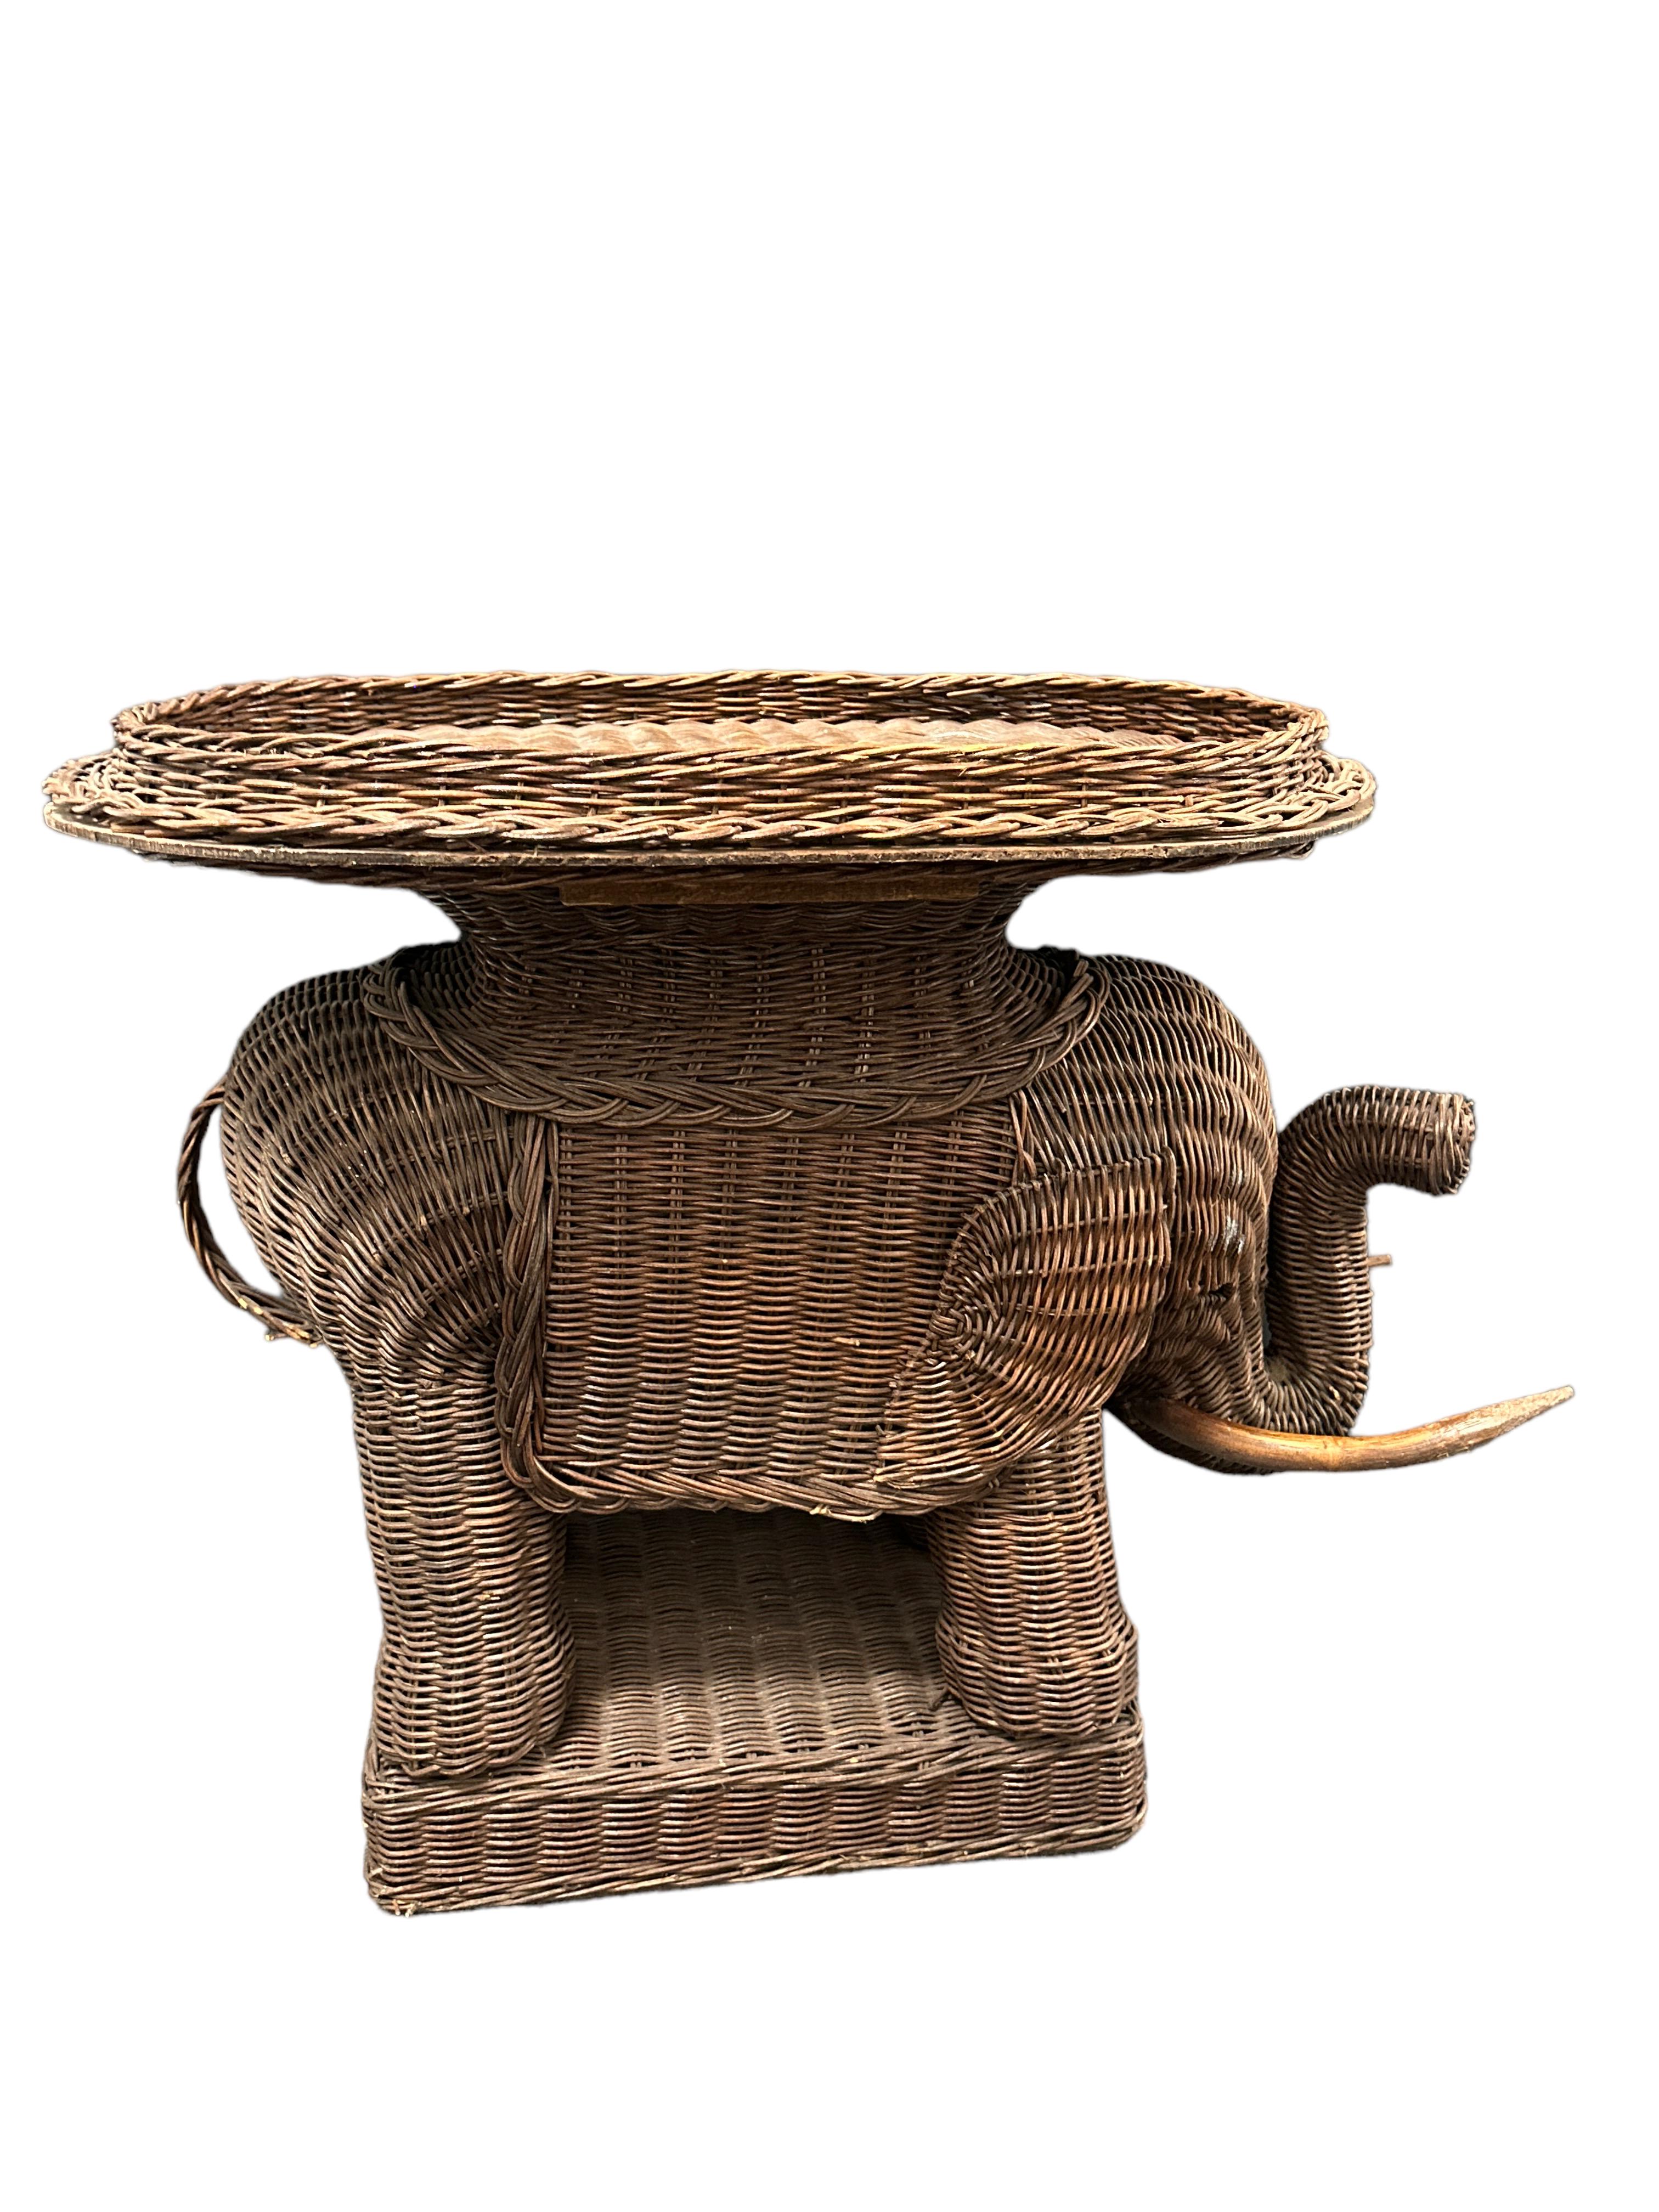 French Stunning Rattan Wicker Elephant Side Table with Tray, France, 1960s For Sale